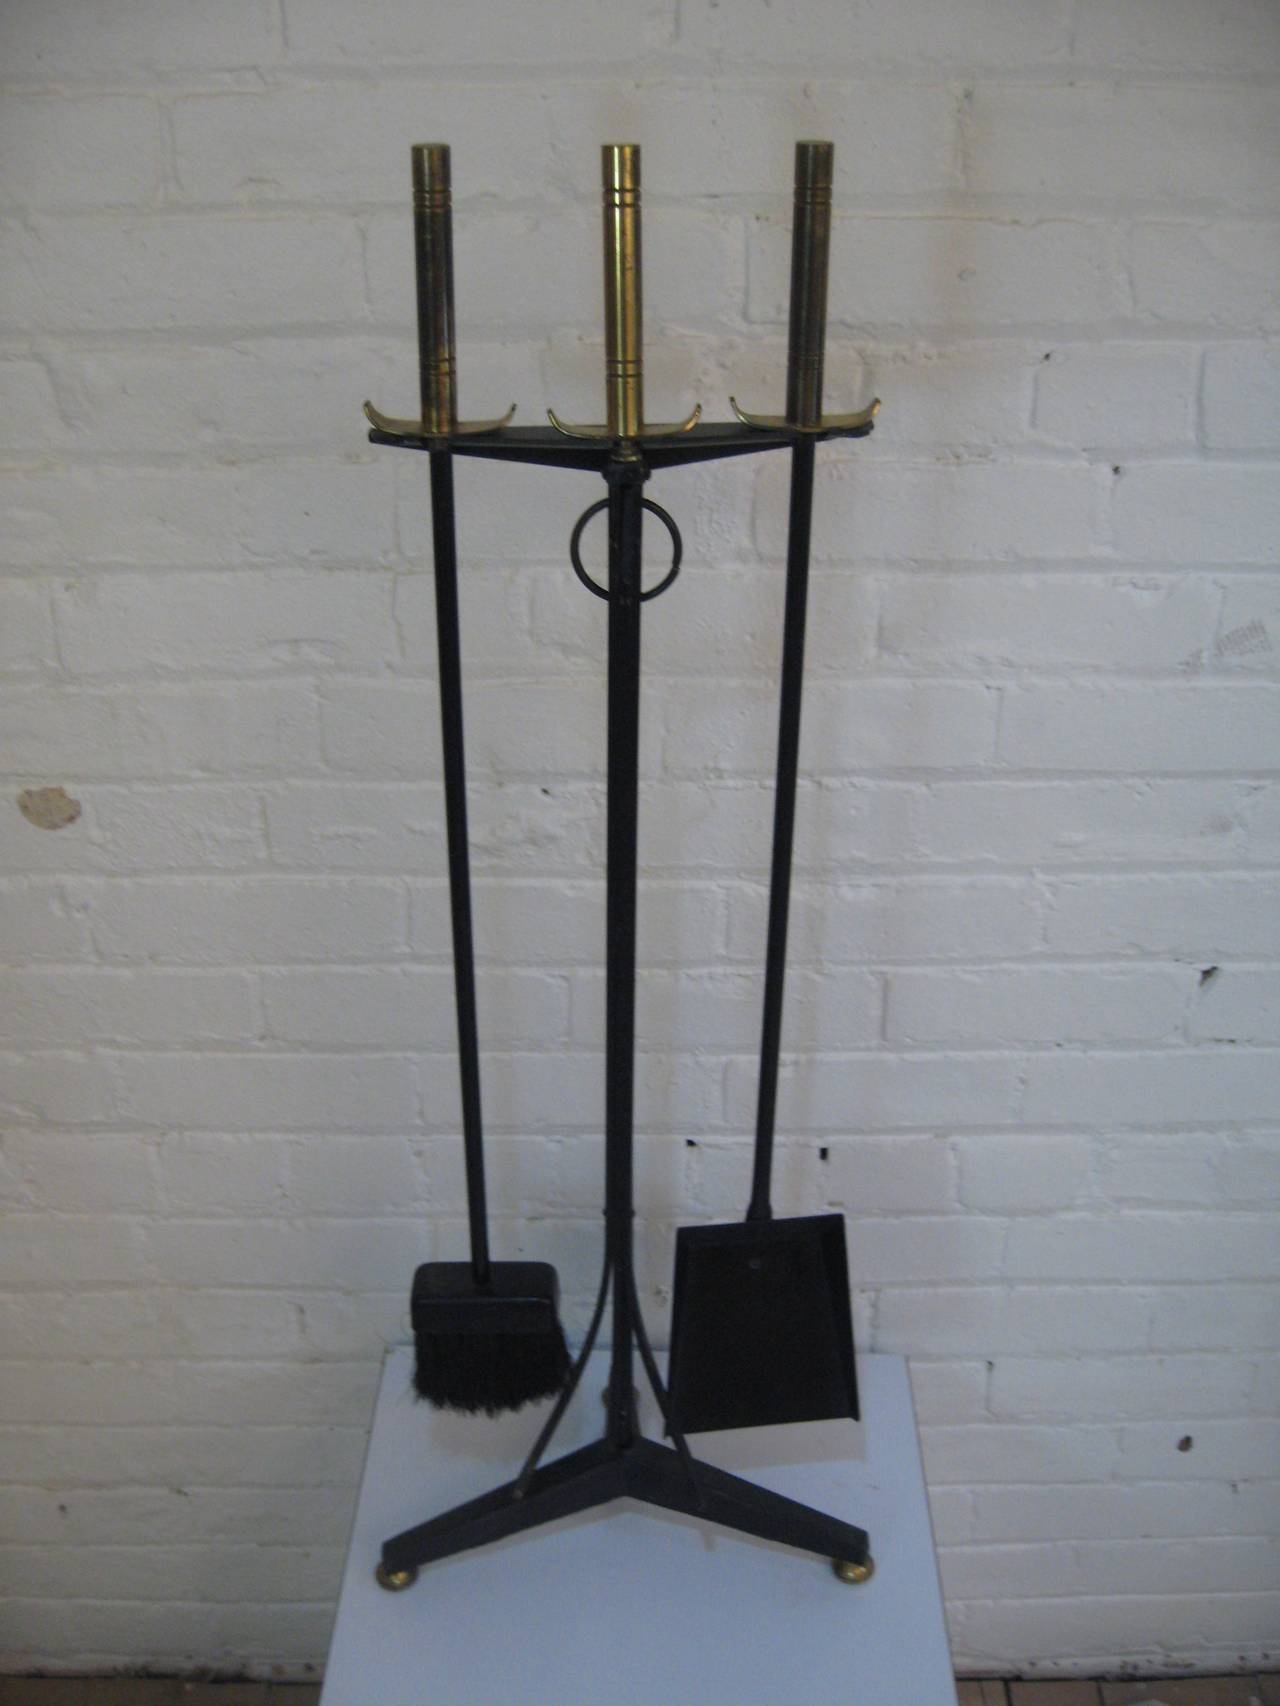 Fine set of modern fireplace tools.  Complete set consisting of brush, tongs, and shovel with tripod stand.  The brass handles are reminiscent of Tommi Parzinger designs for Dorlyn Silversmiths.  Circa 1950-60.